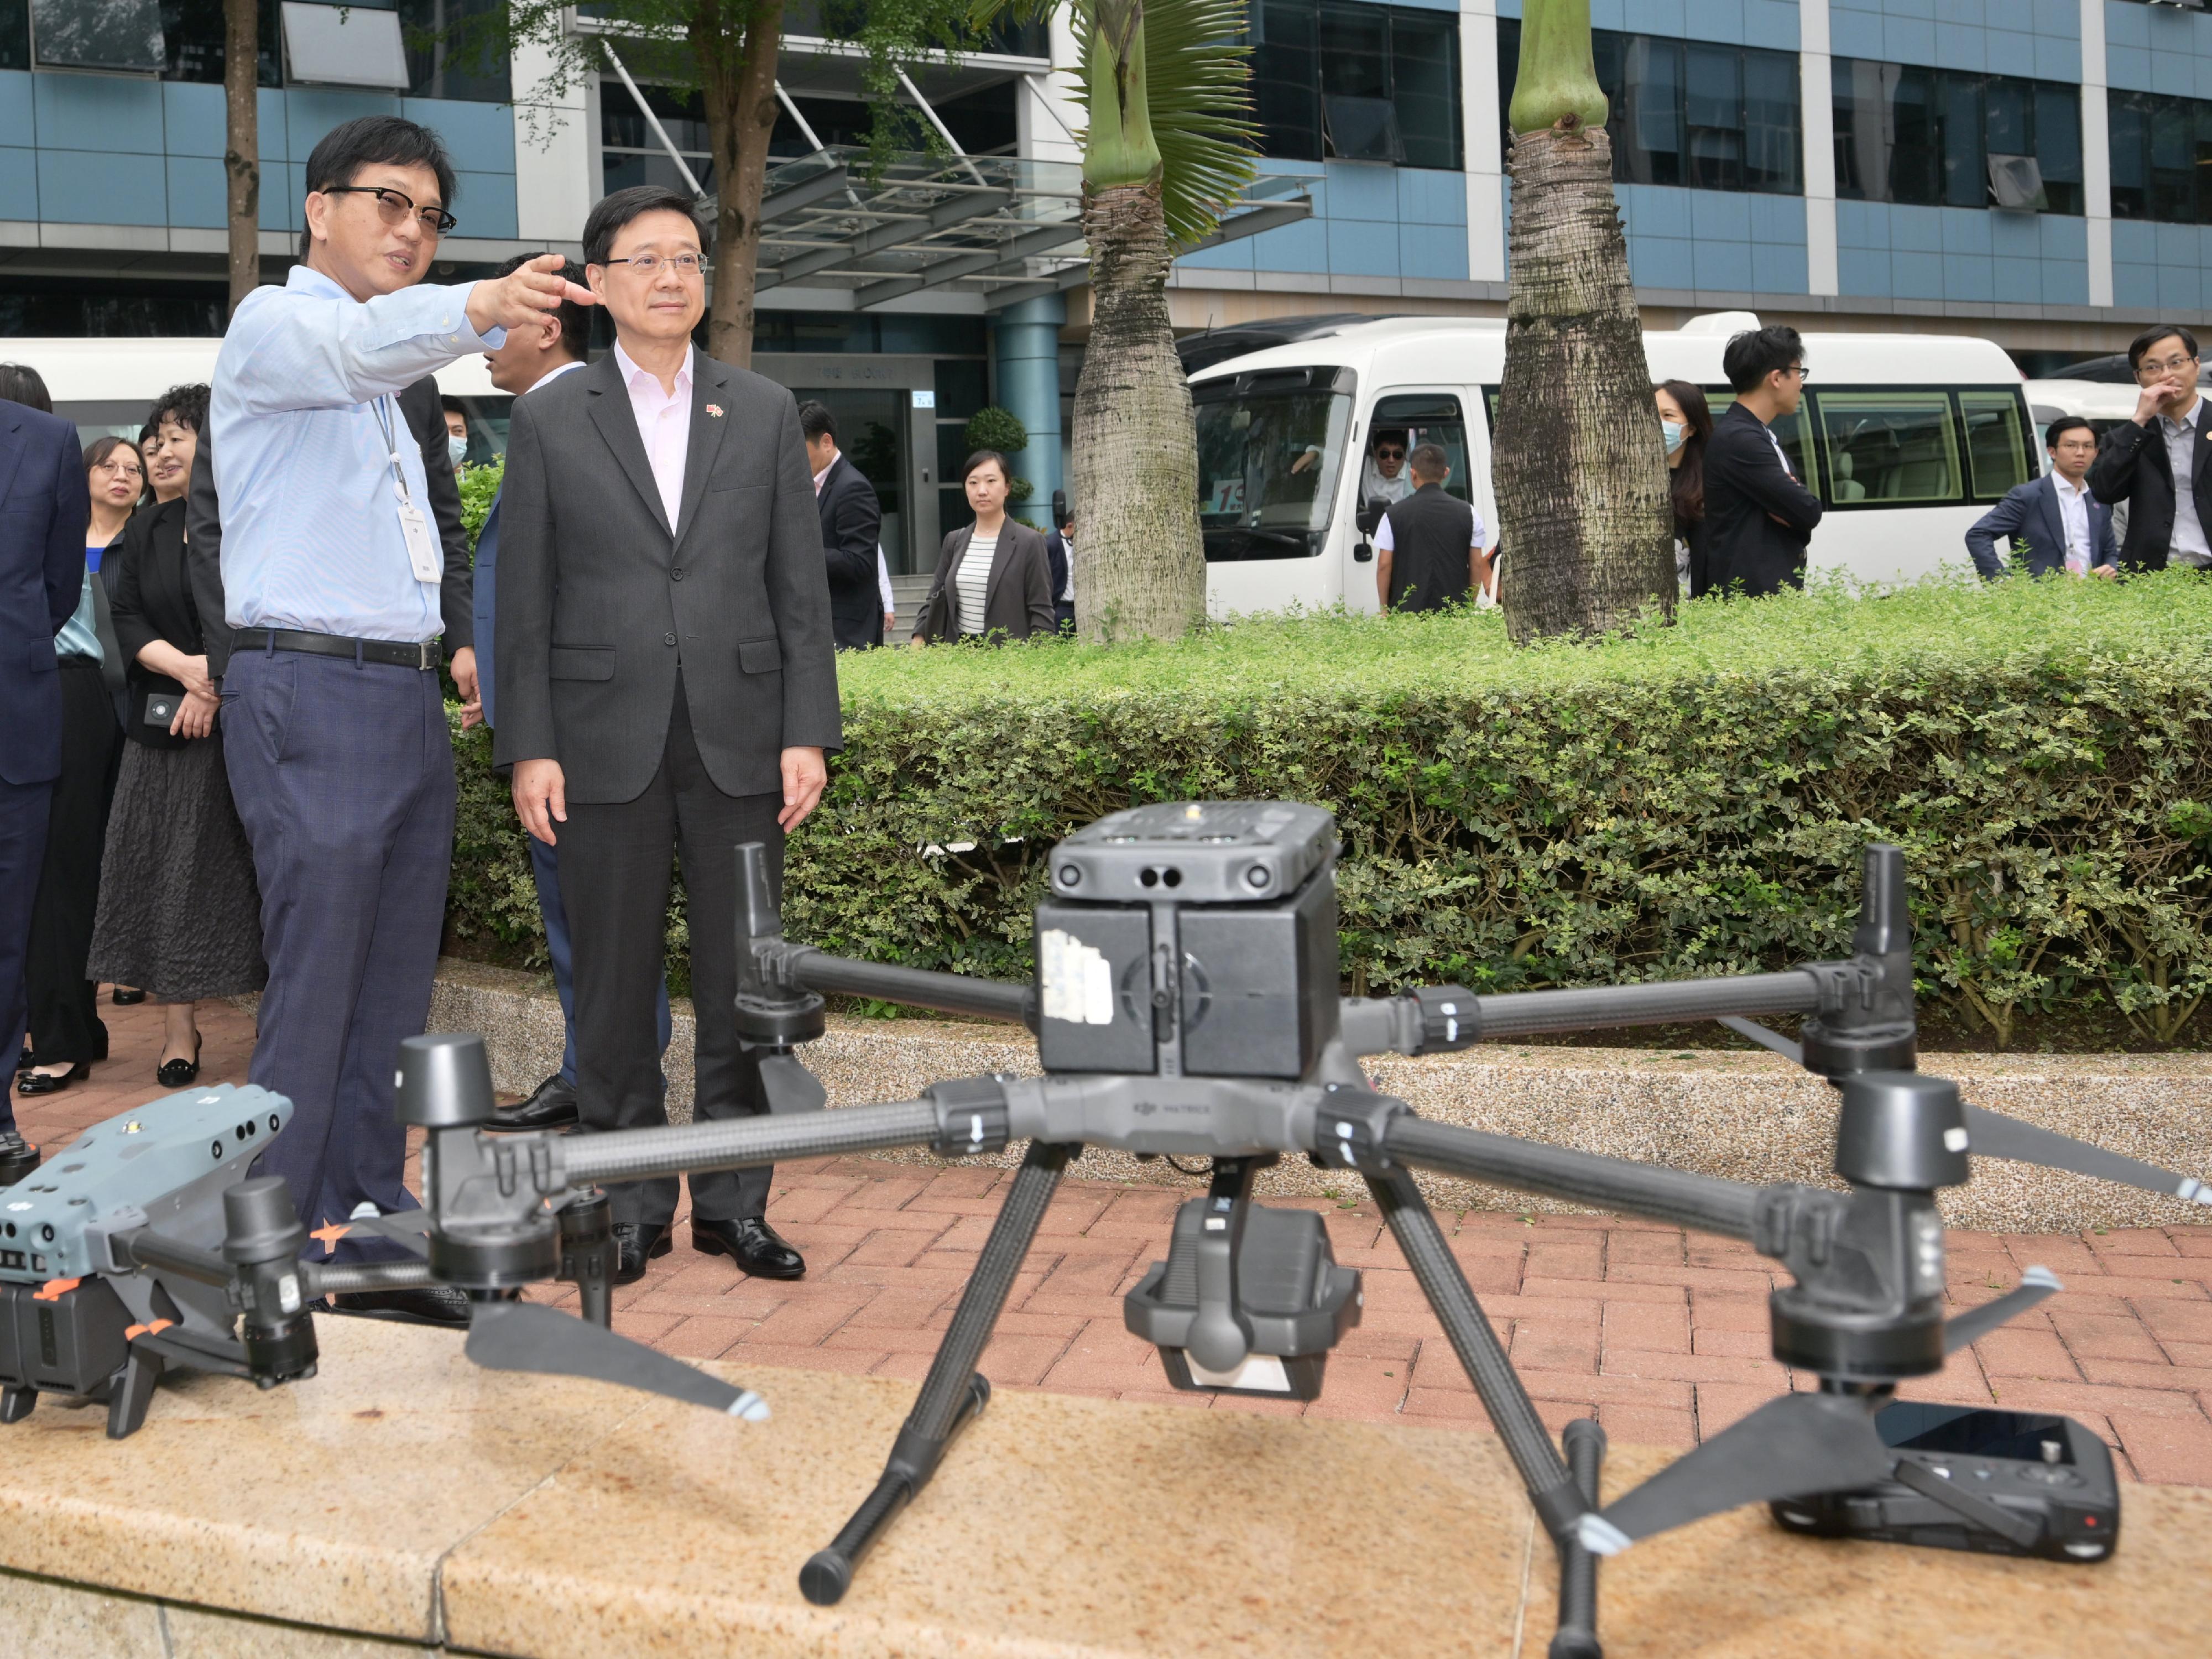 The Chief Executive, Mr John Lee, led a delegation of the Hong Kong Special Administrative Region Government and the Legislative Council (LegCo) to visit Shenzhen today (April 22). Photo shows Mr Lee (right), visiting the SZ DJI Technology Company Limited.